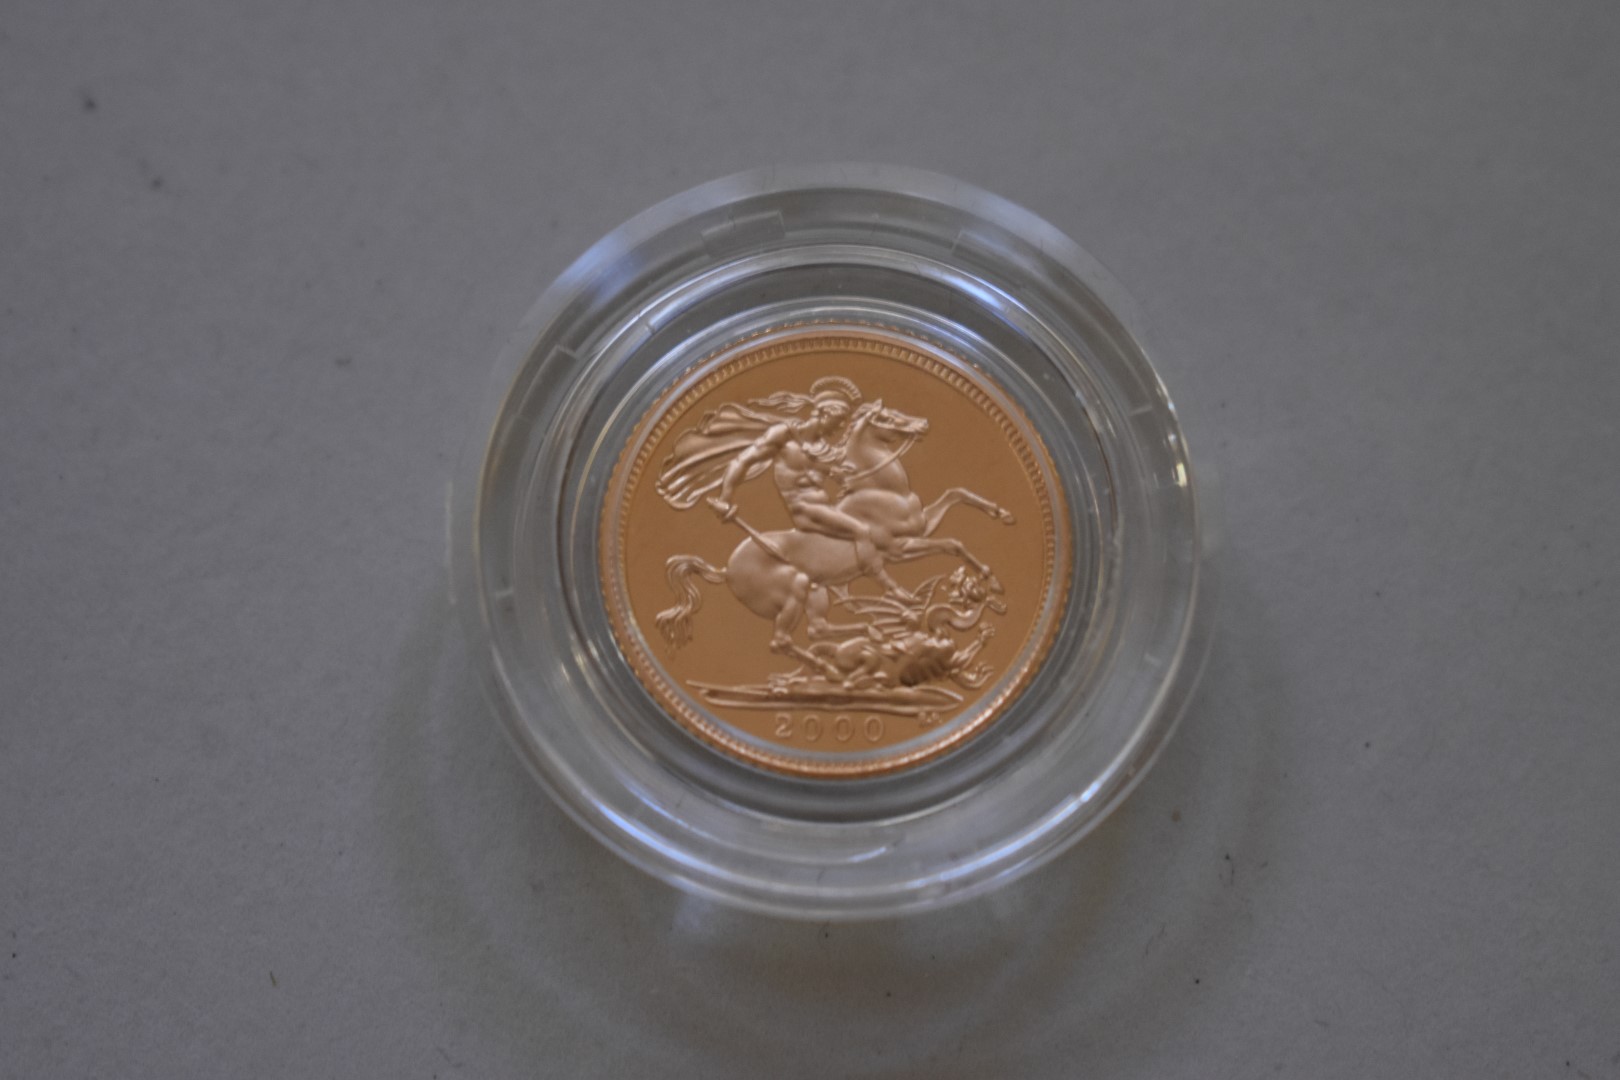 An Elizabeth II 2000 gold proof half sovereign, boxed. - Image 2 of 3